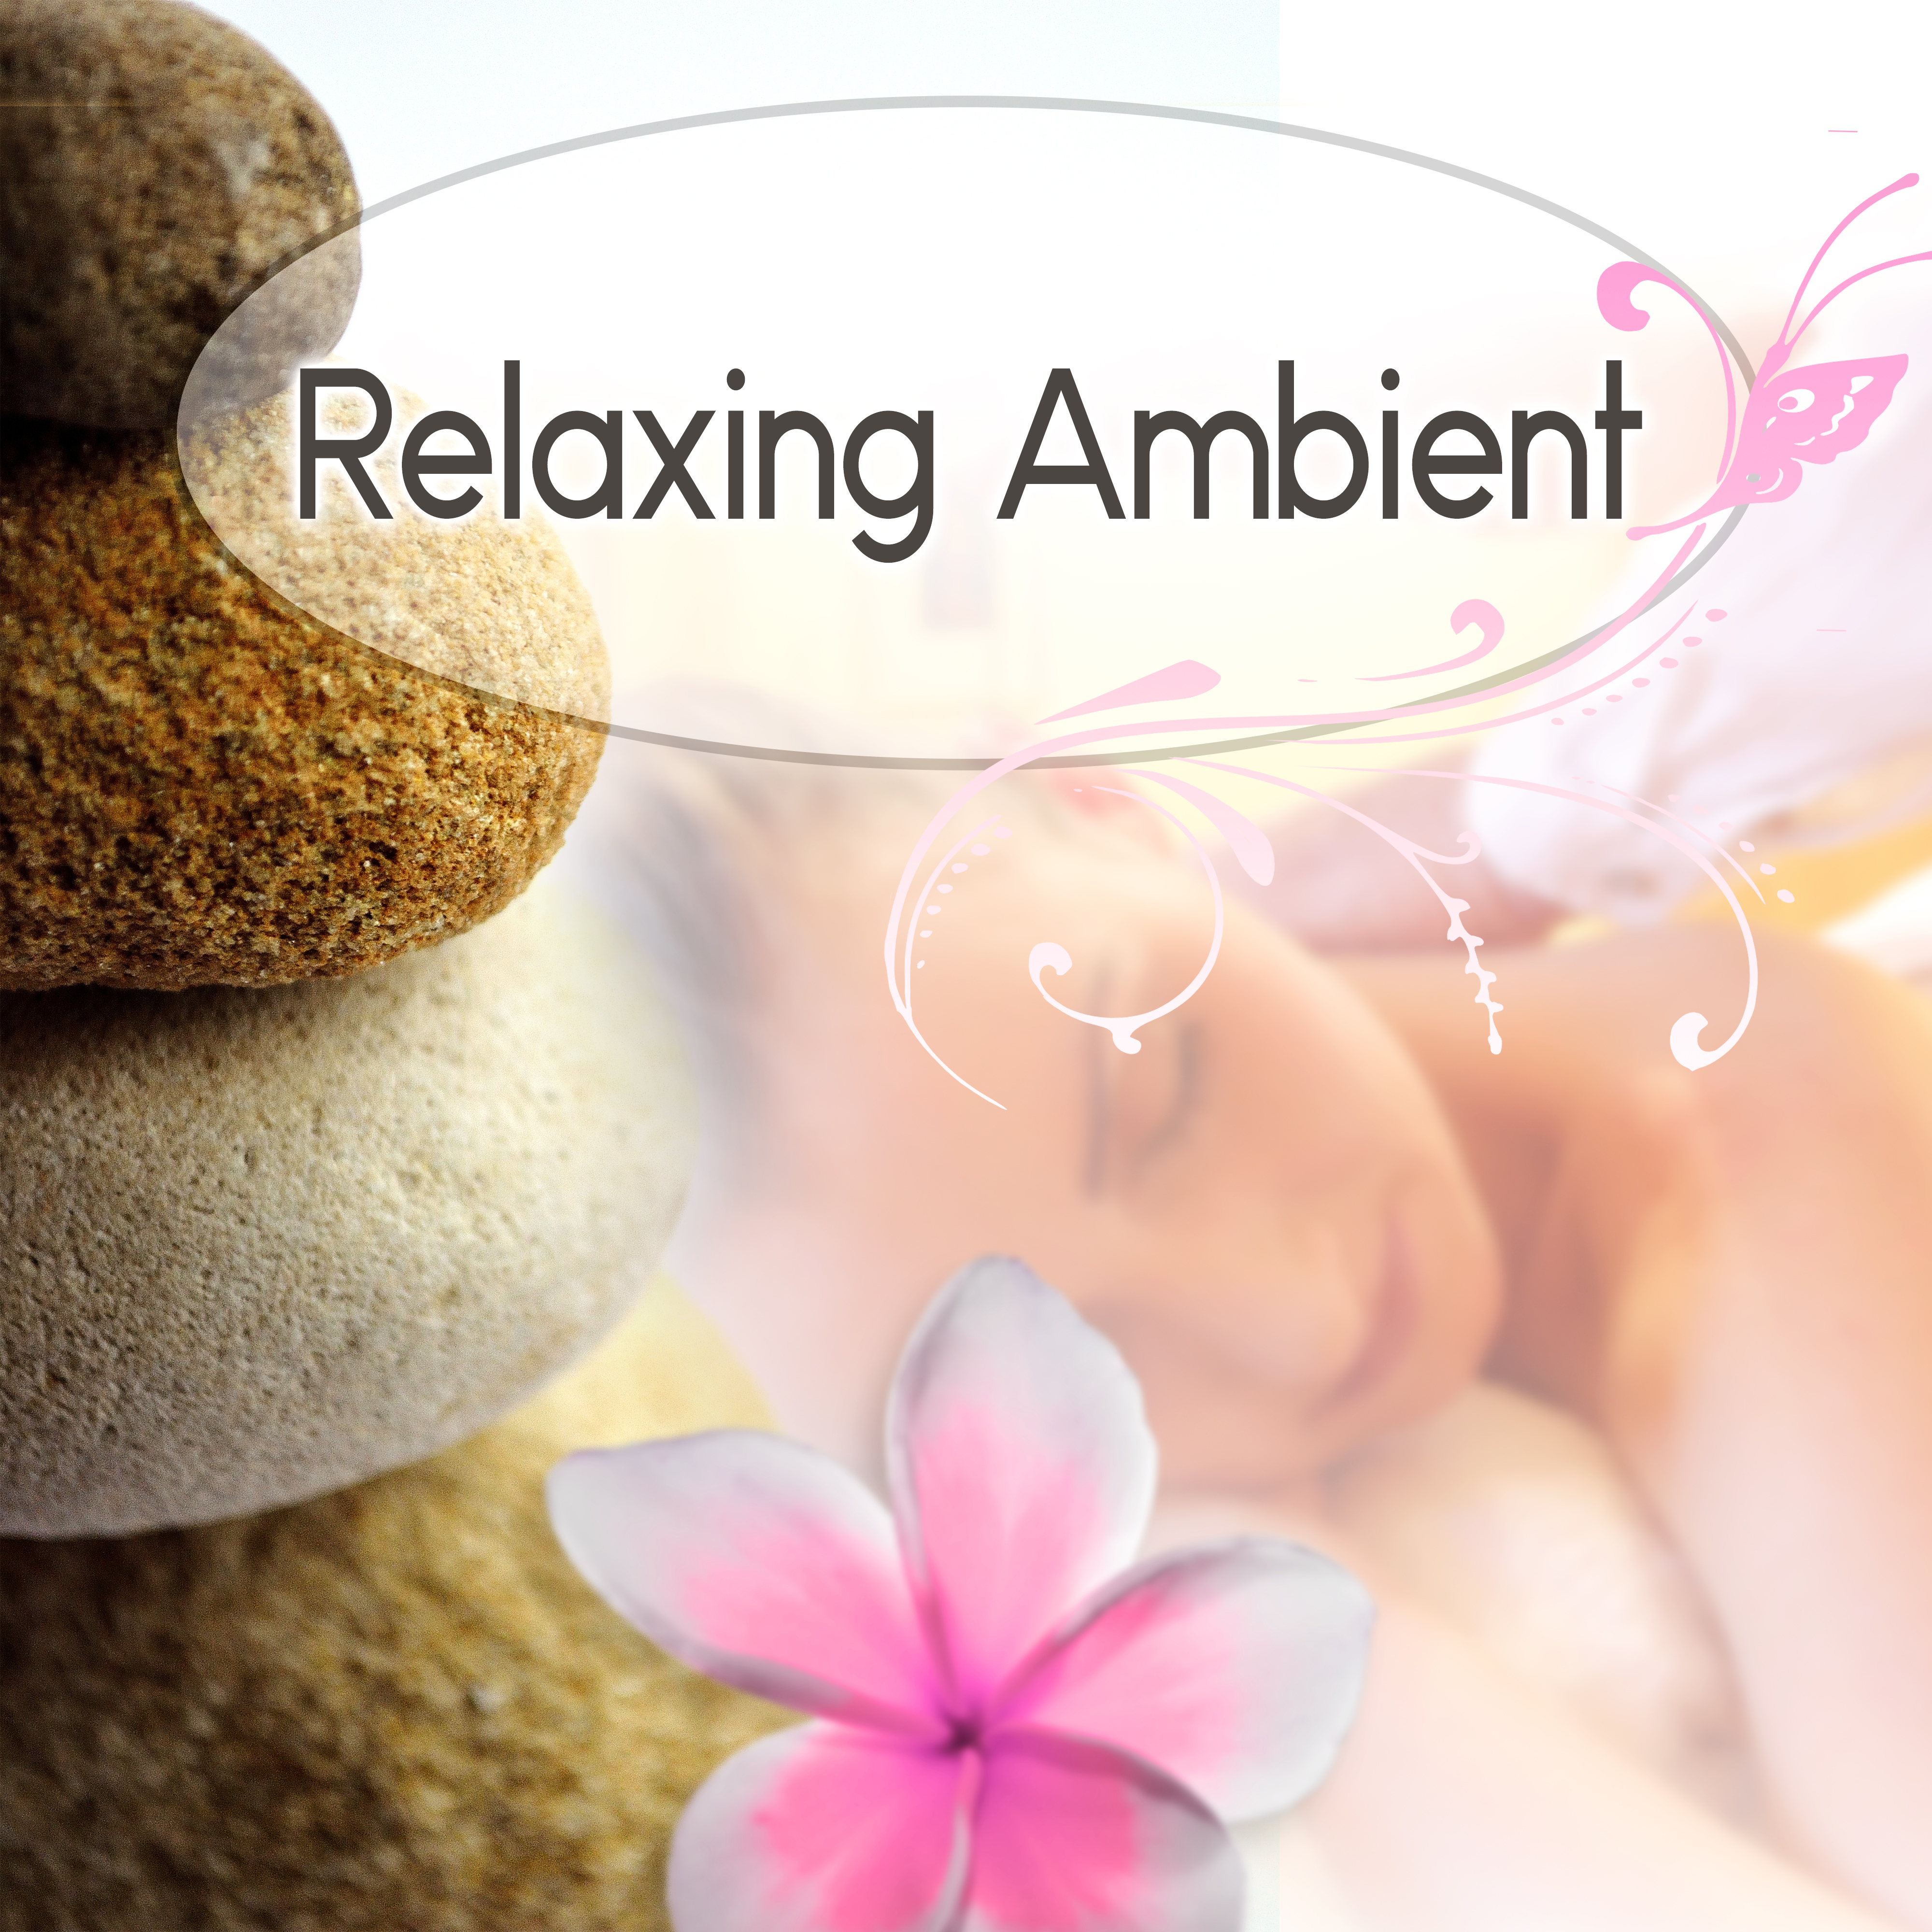 Relaxing Ambient  New Age, Spiritual Healing, Sounds of Nature, Massage, Spa, Wellness